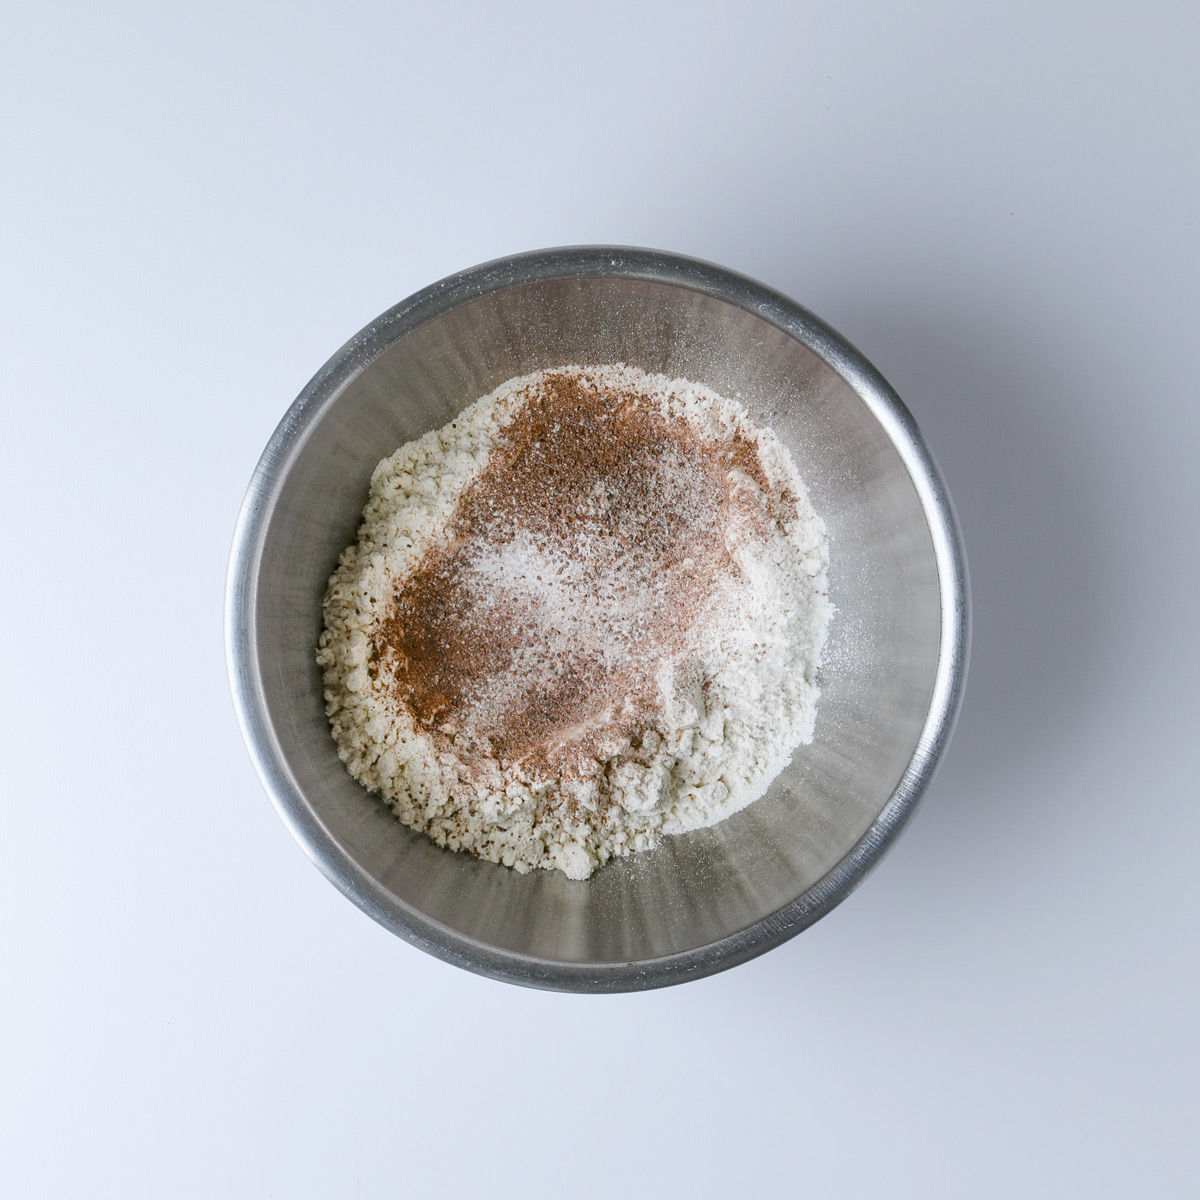 dry ingredients added to a mixing bowl.